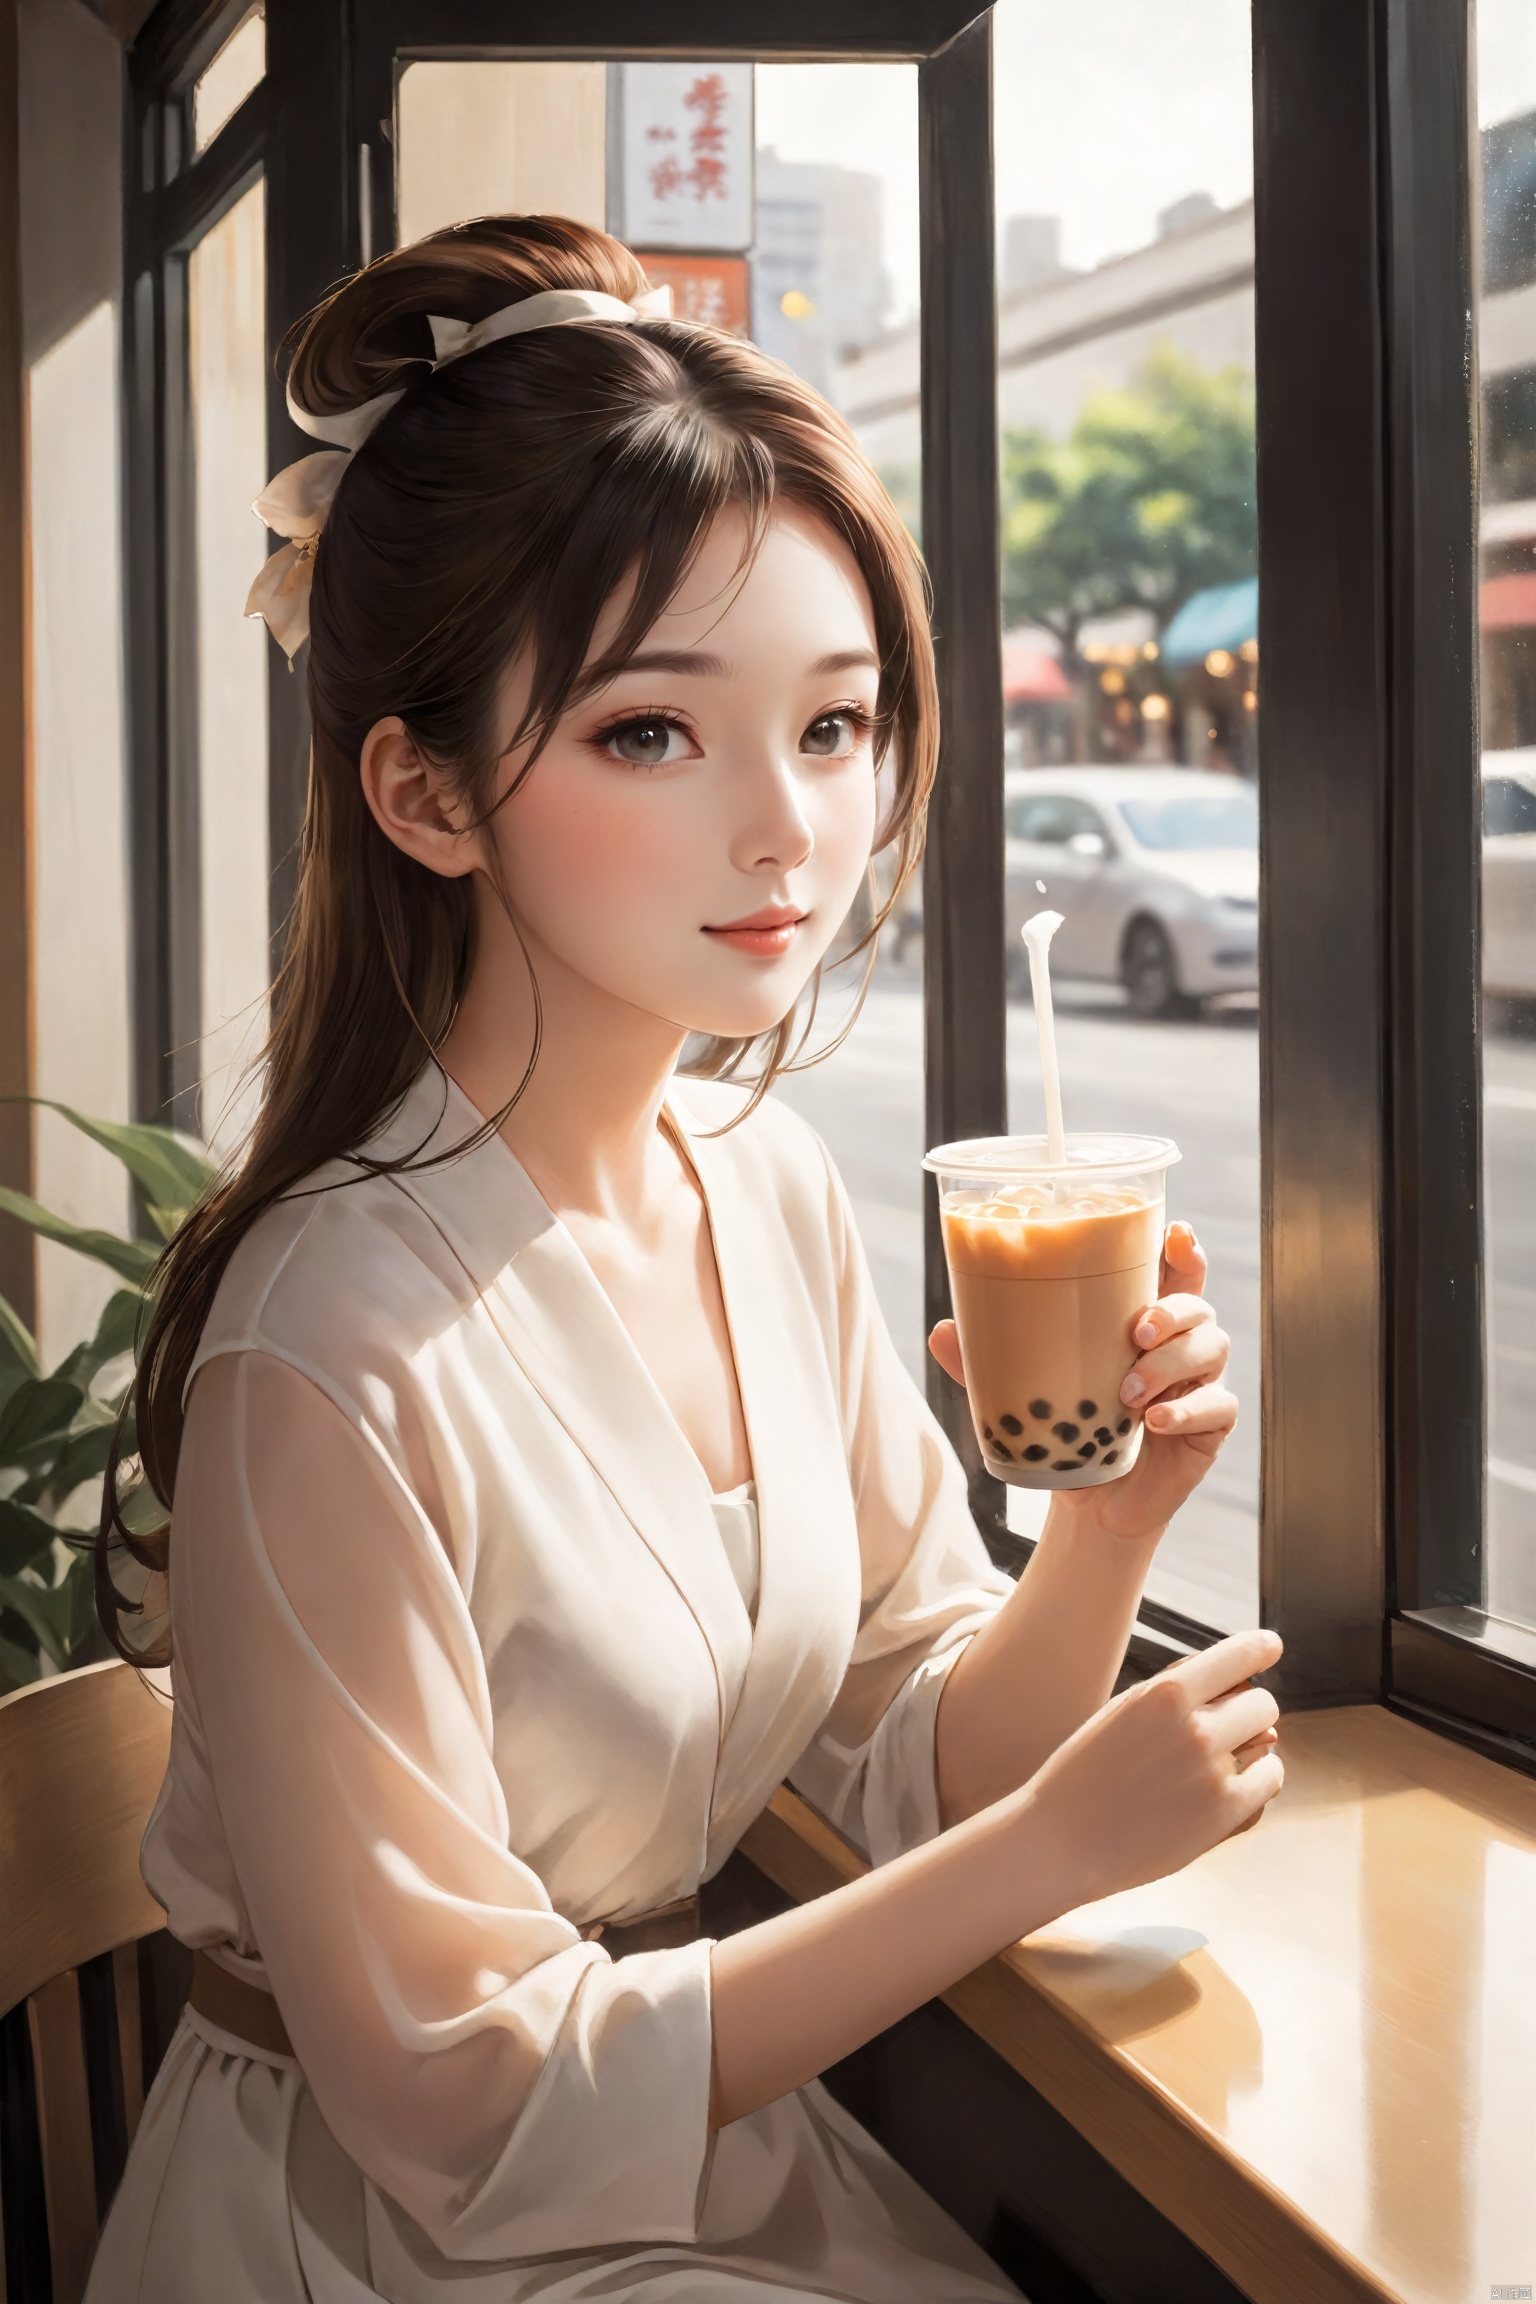 A young woman in her early twenties sits in a modern milk tea shop, holding a steaming cup of milk tea in her hands. Her eyes show a hint of contentment as she occasionally glances out the window, where the street scene creates a dynamic canvas on the glass. The soft lighting inside the shop mingles with the aroma of the milk tea, creating a relaxed and joyful atmosphere. She gently blows on the milk tea, sipping it with care, as if savoring a small but certain happiness of her own.